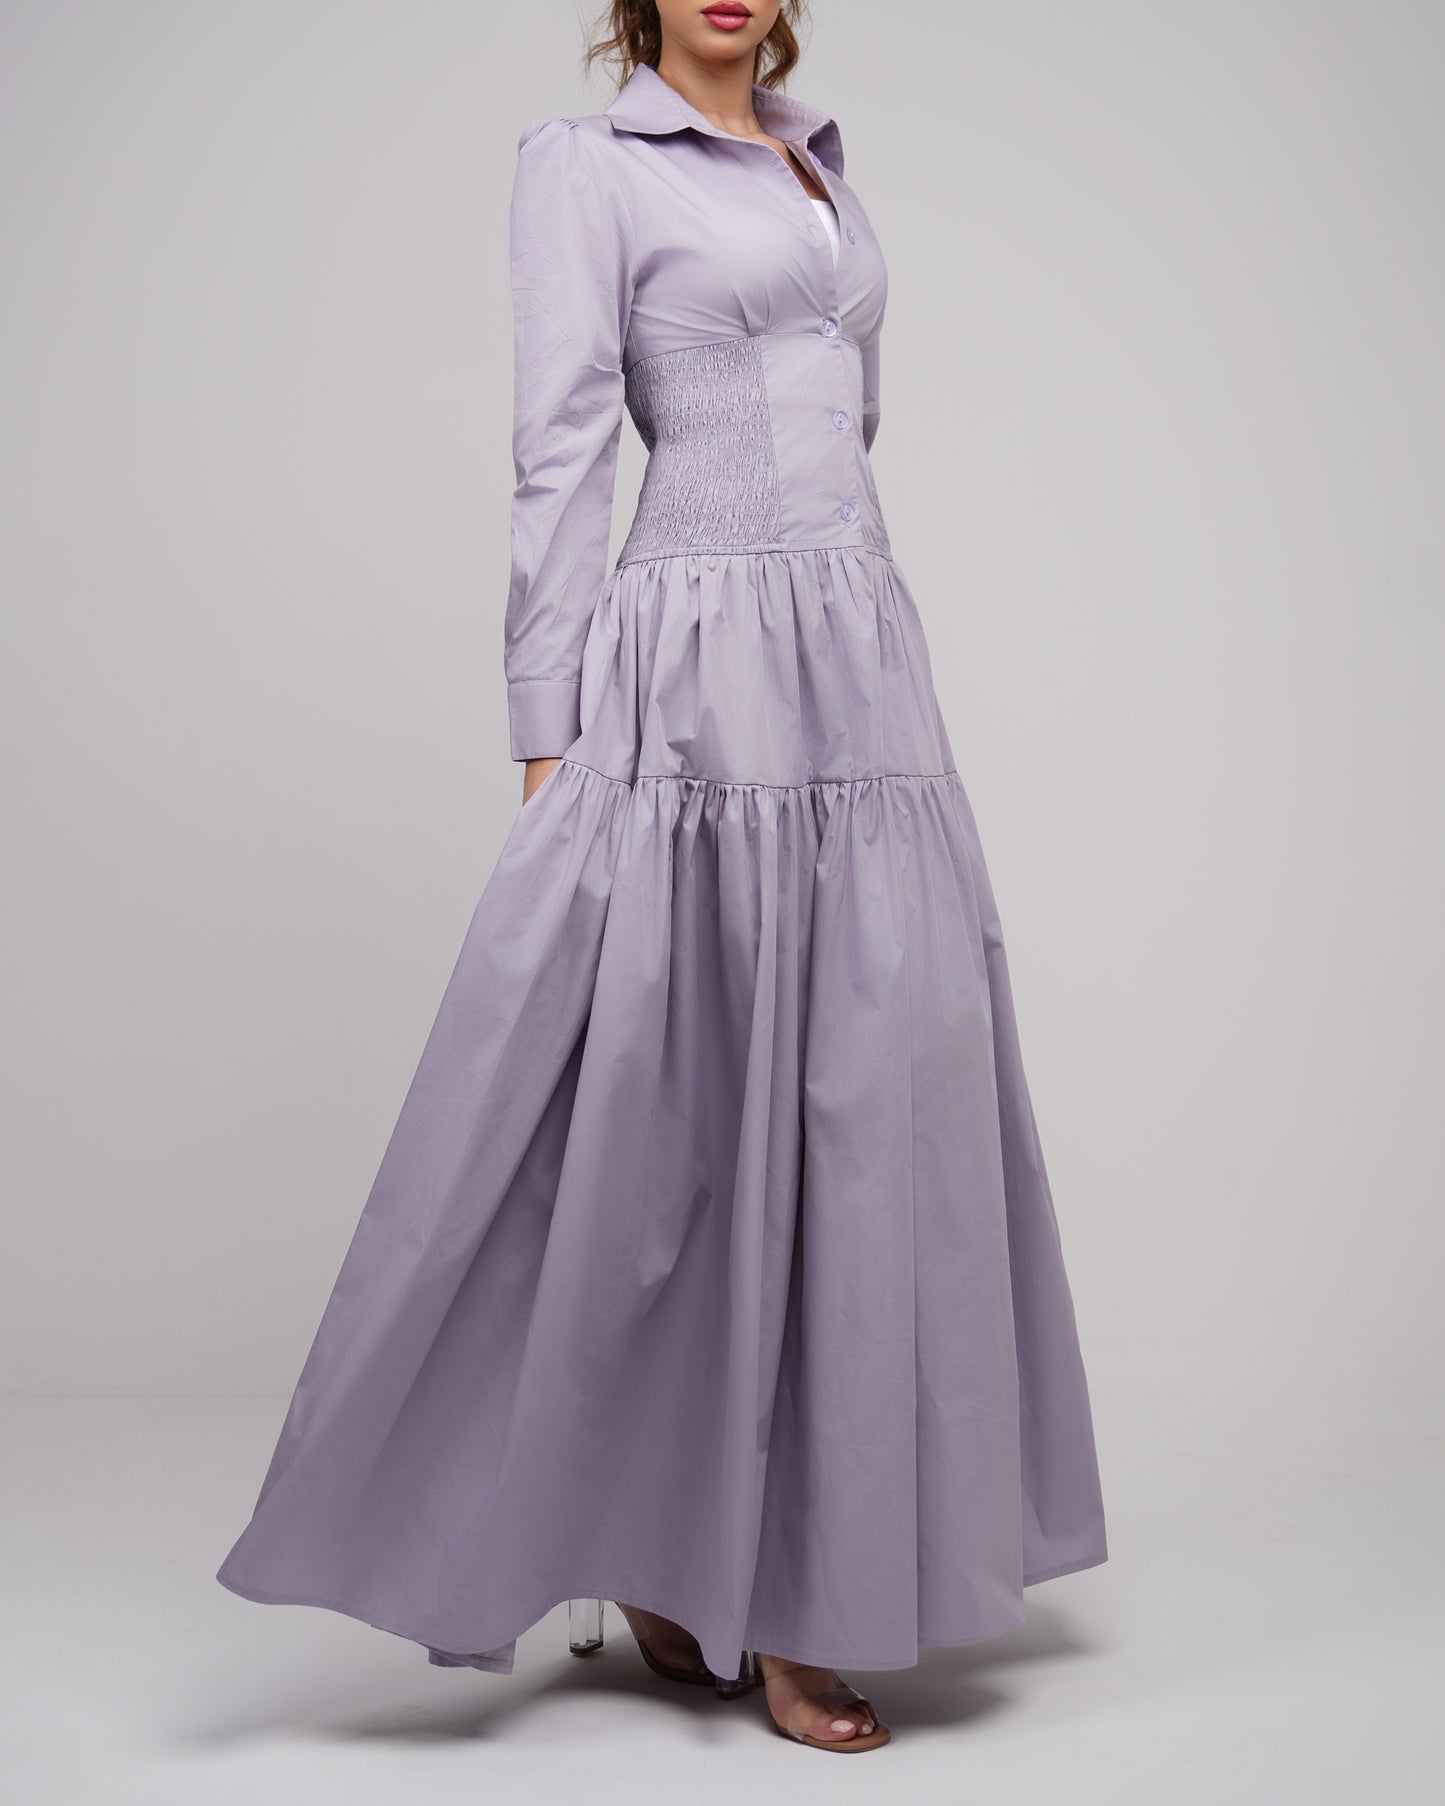 Grey purple maxi dress with back strapped belt effect